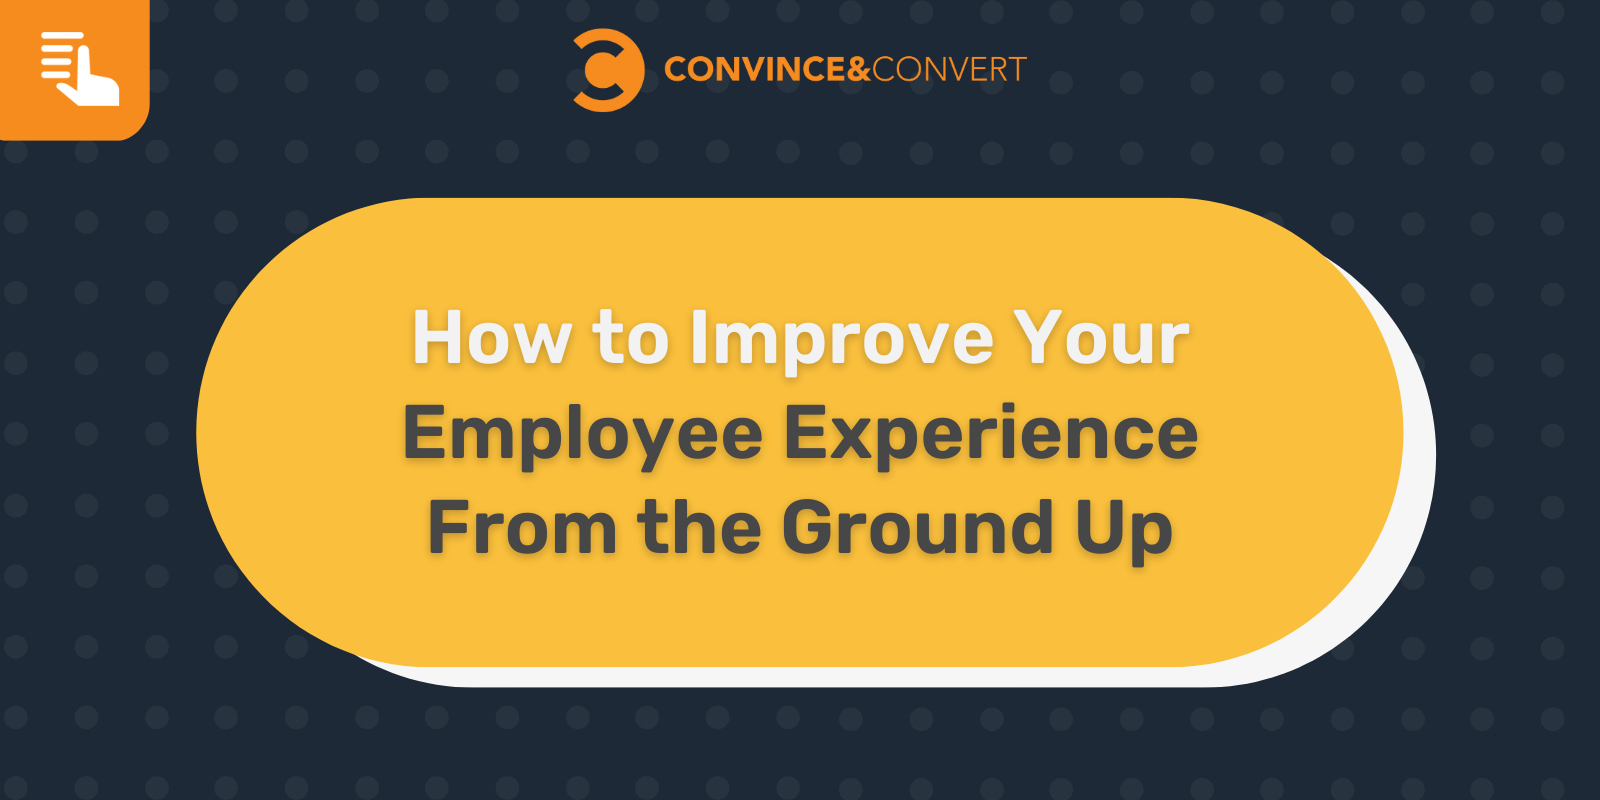 How to Improve Your Employee Experience From the Ground Up